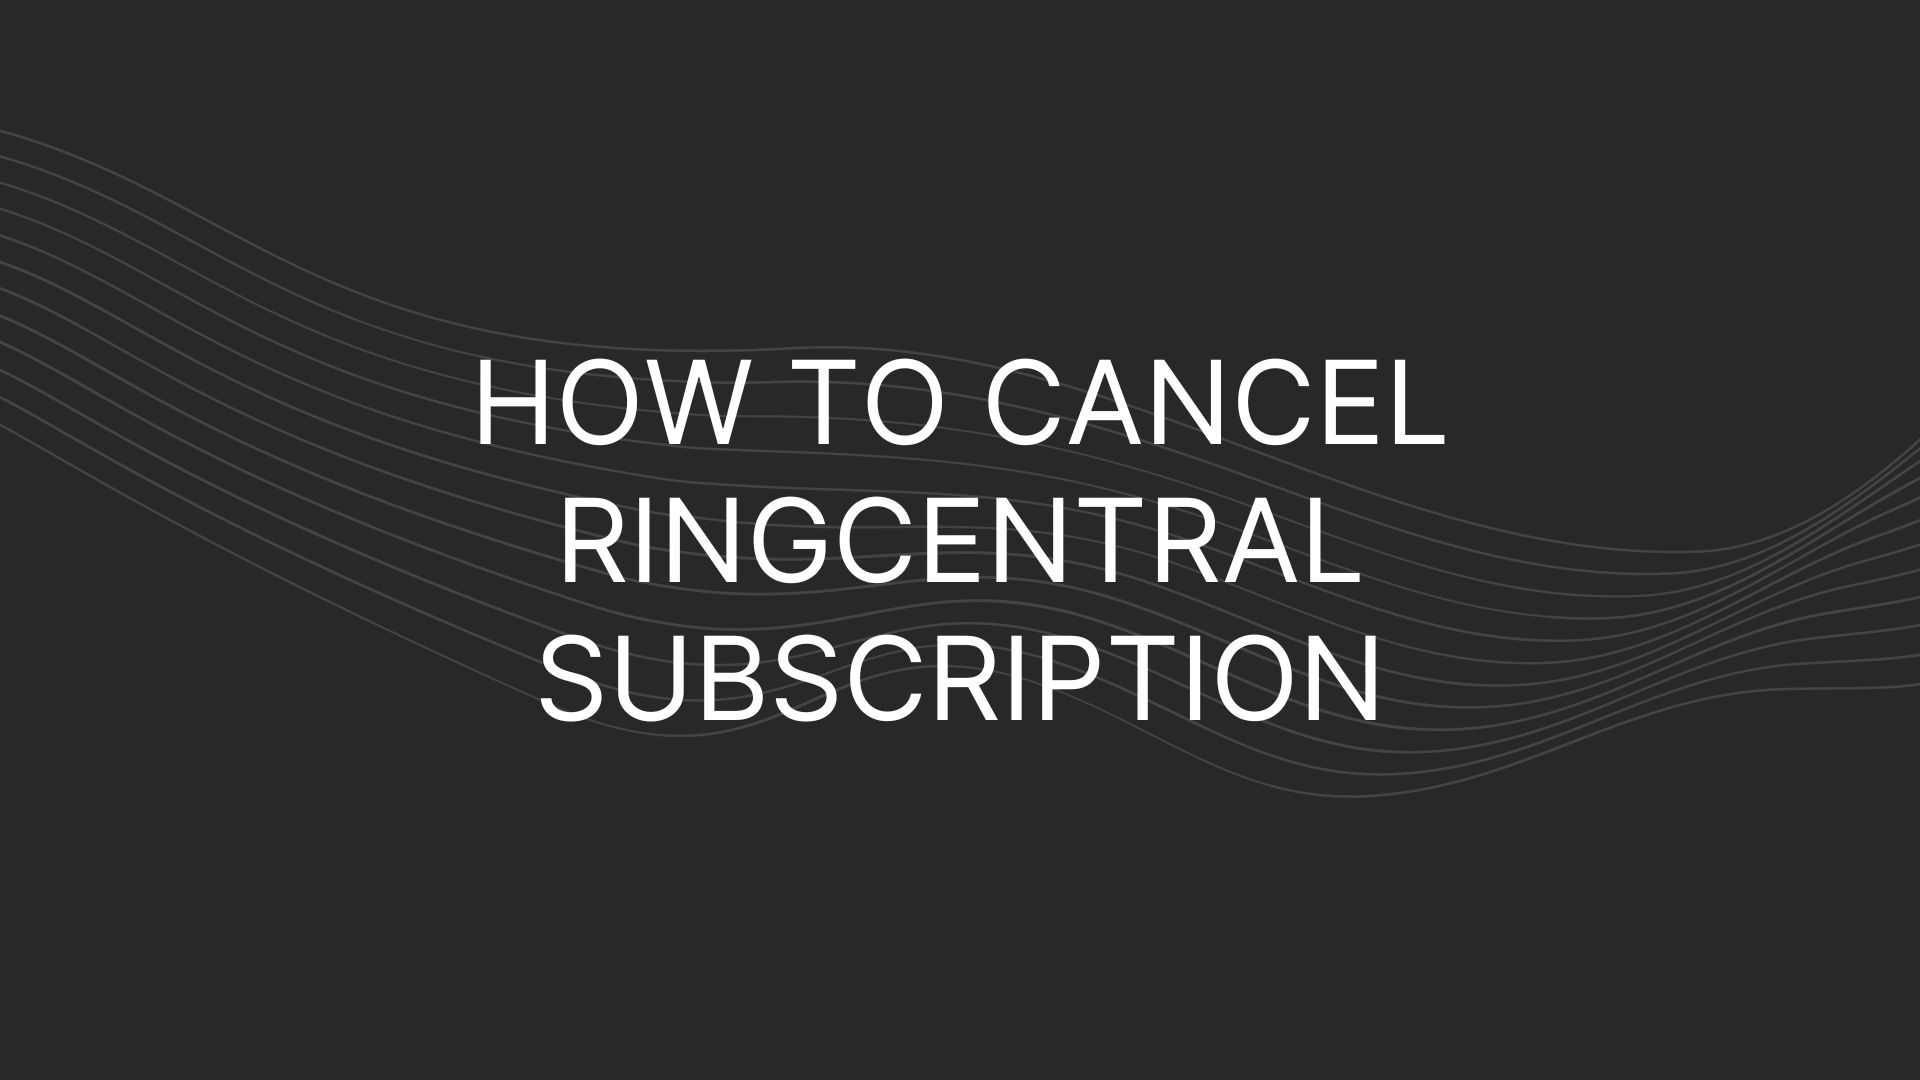 See how you can cancel your RingCentral subscription if few simple steps